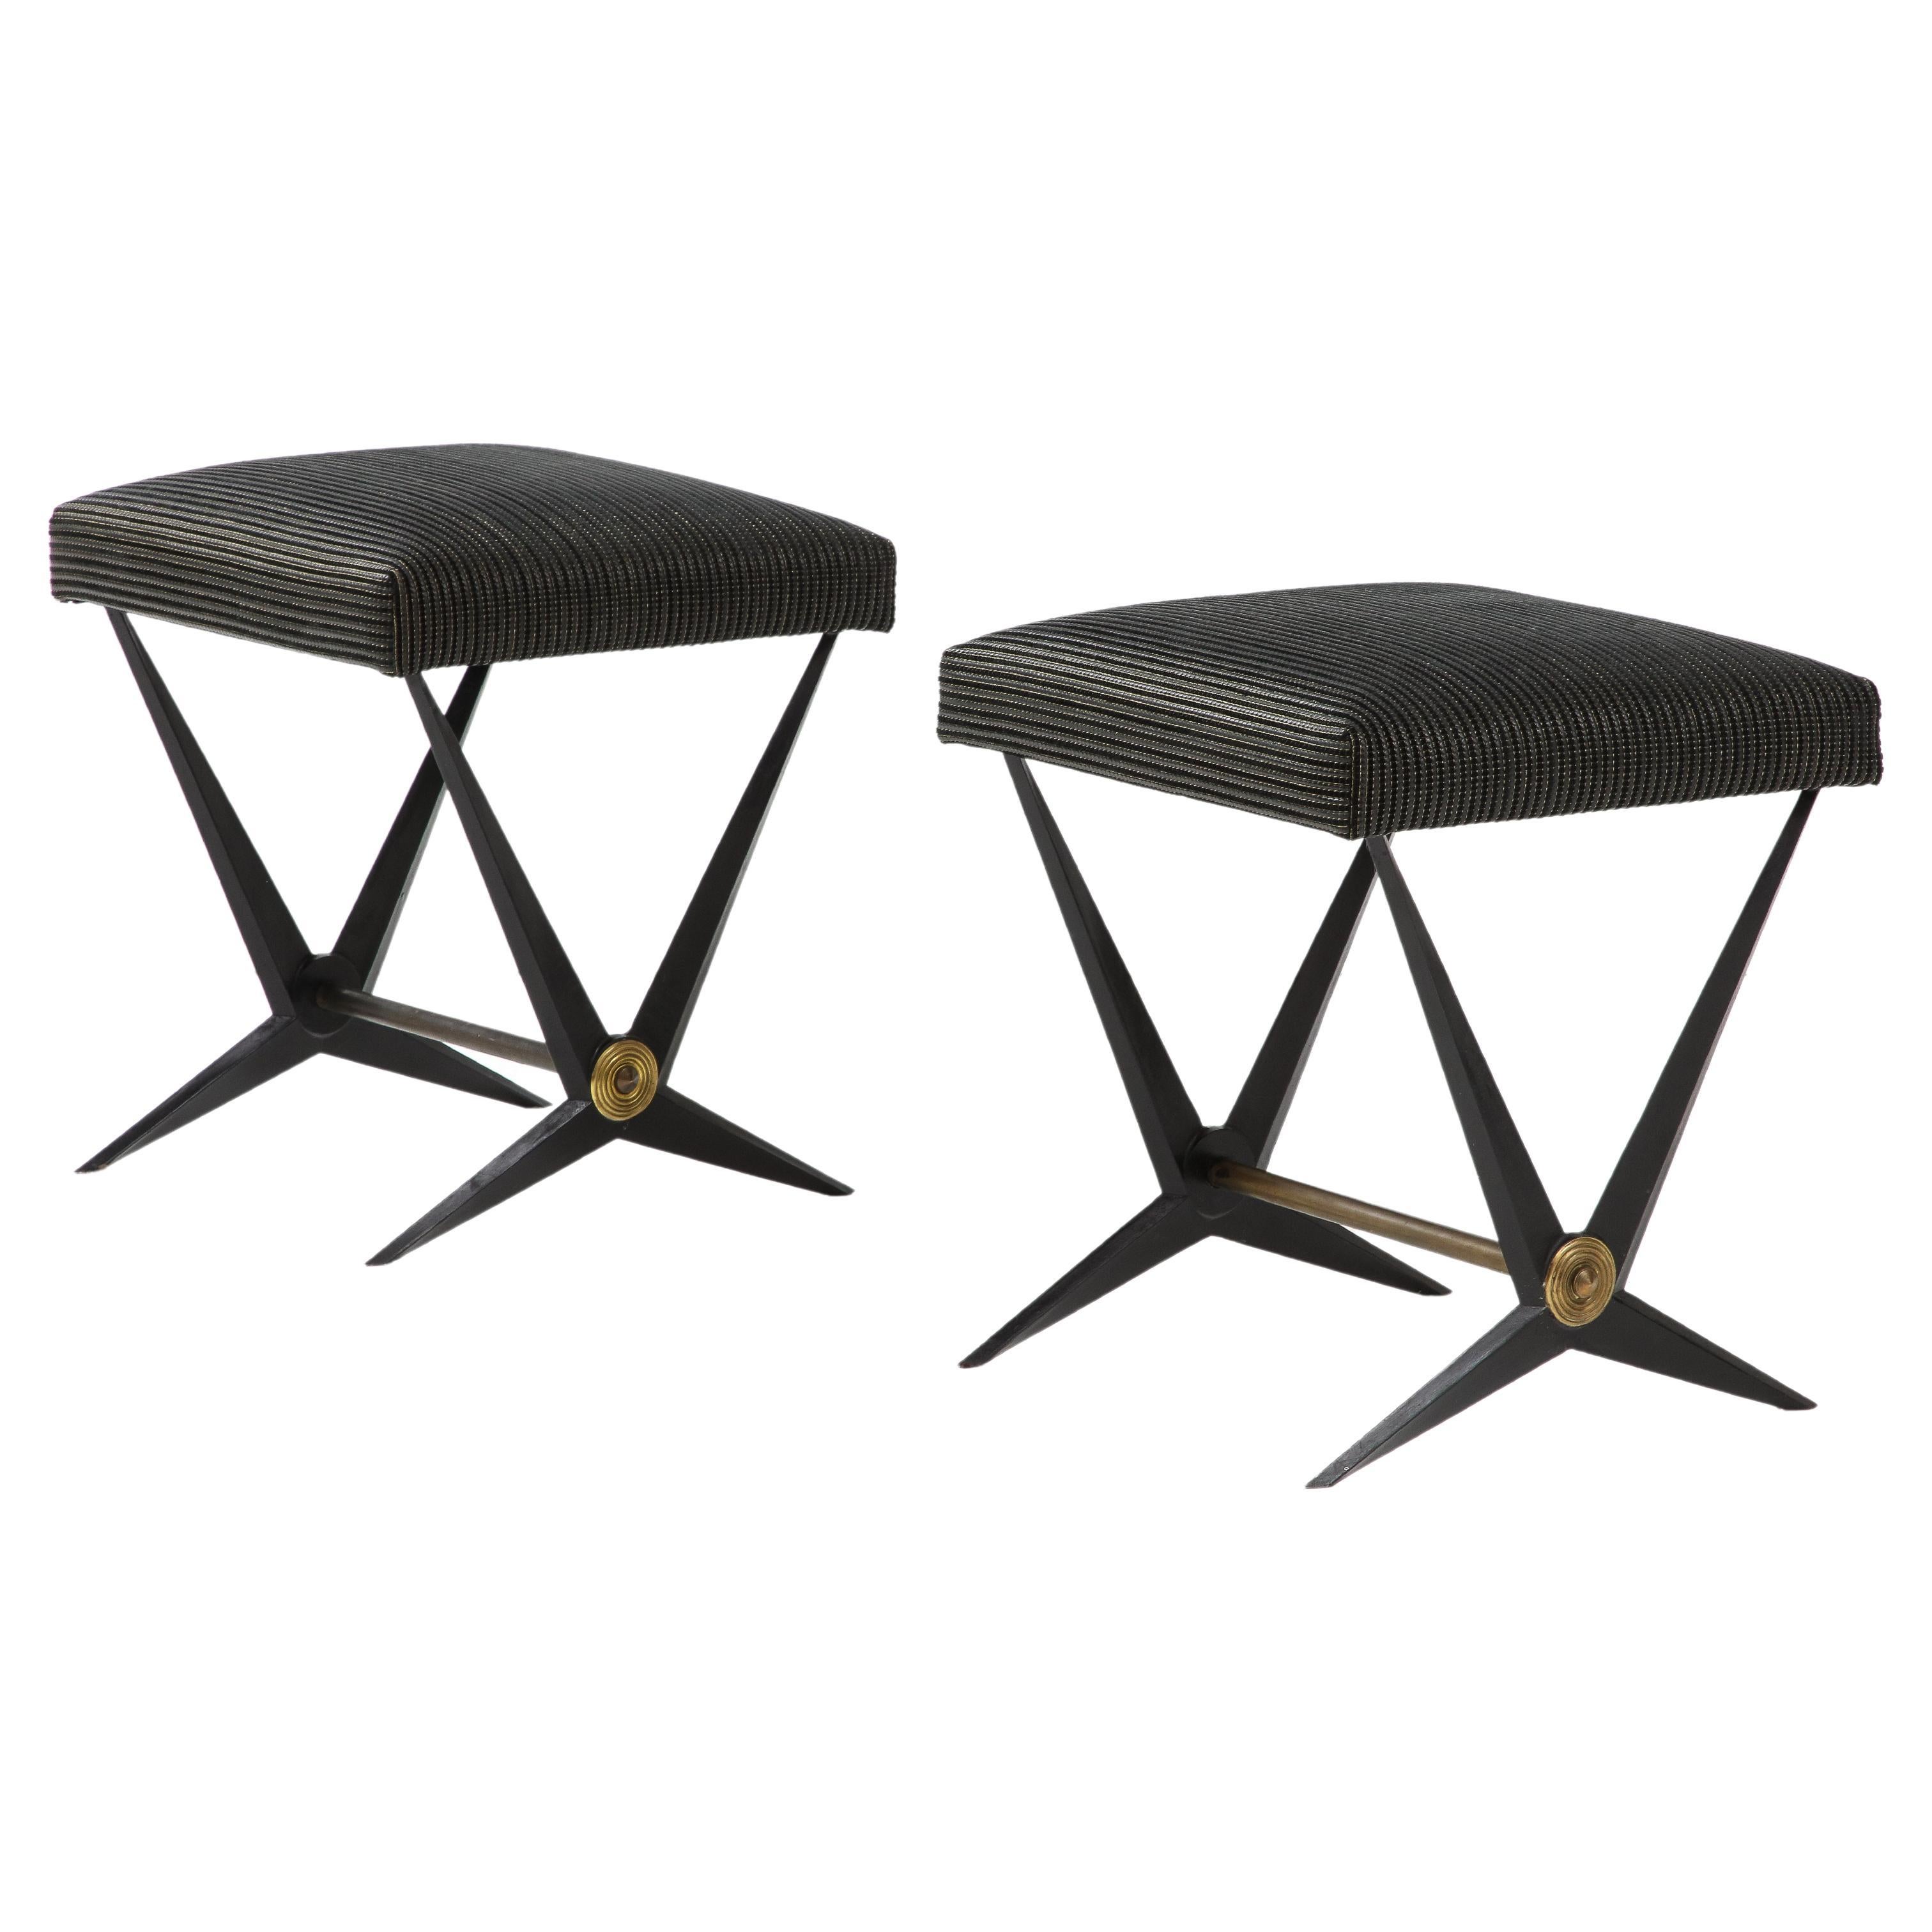  Pair Of French Black Mid-Century Benches With Brass Accents By Jacques Tournus For Sale